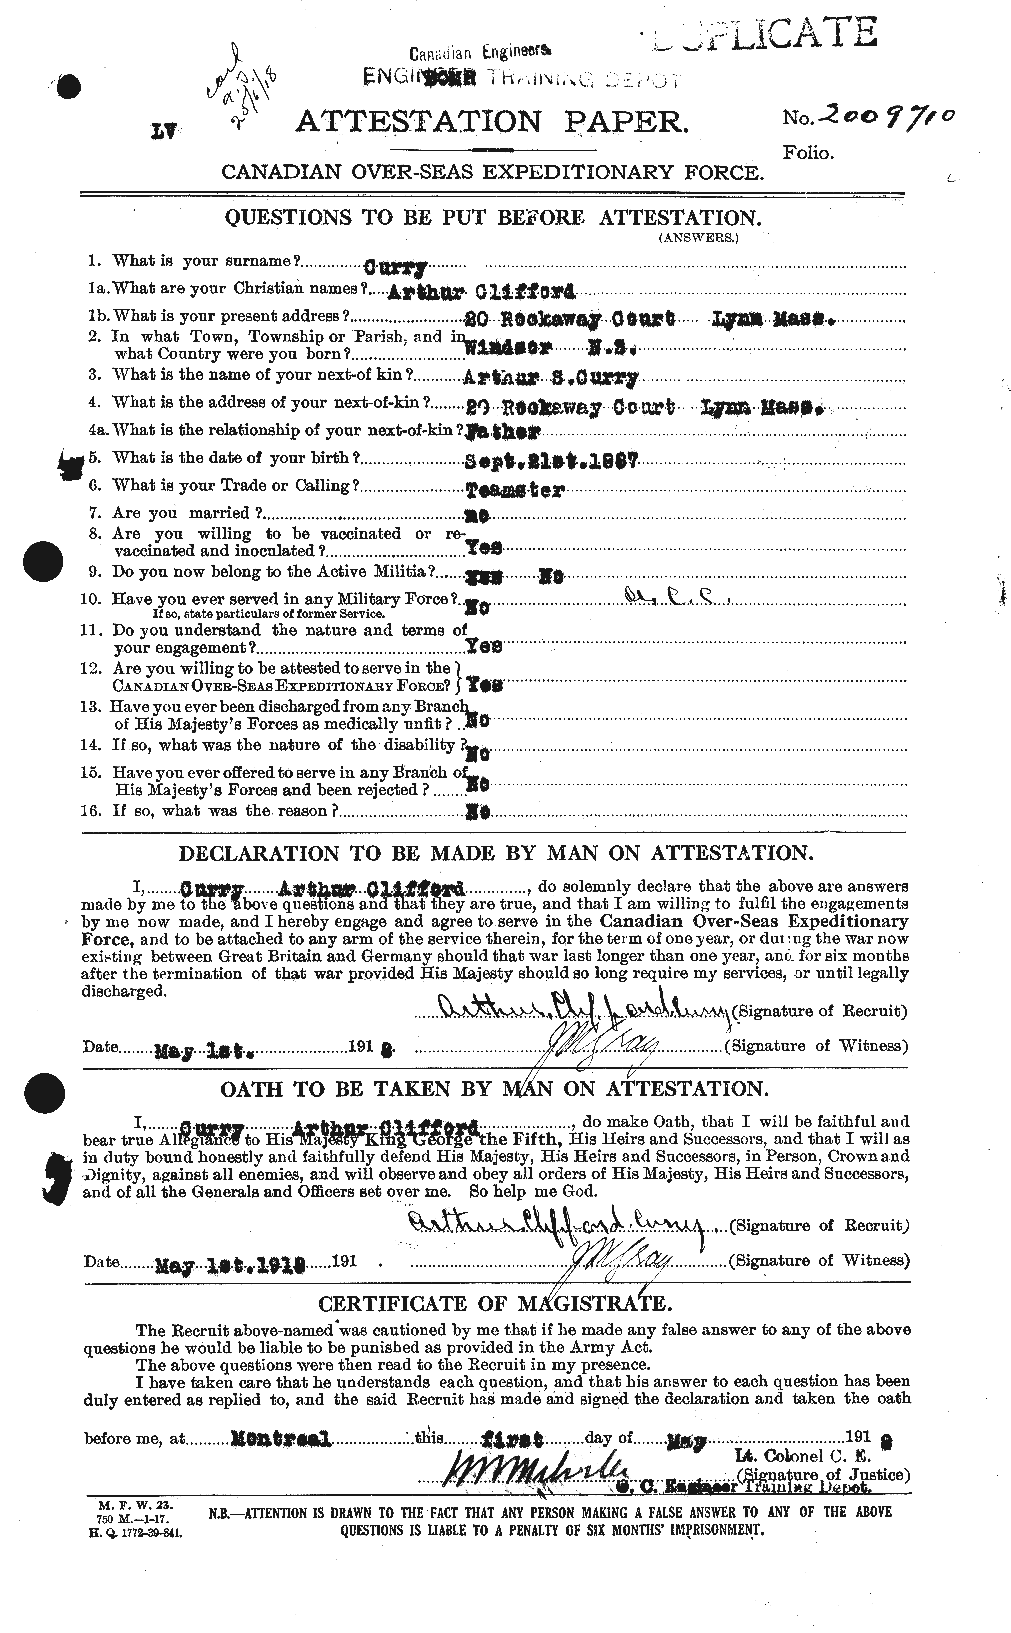 Personnel Records of the First World War - CEF 071221a